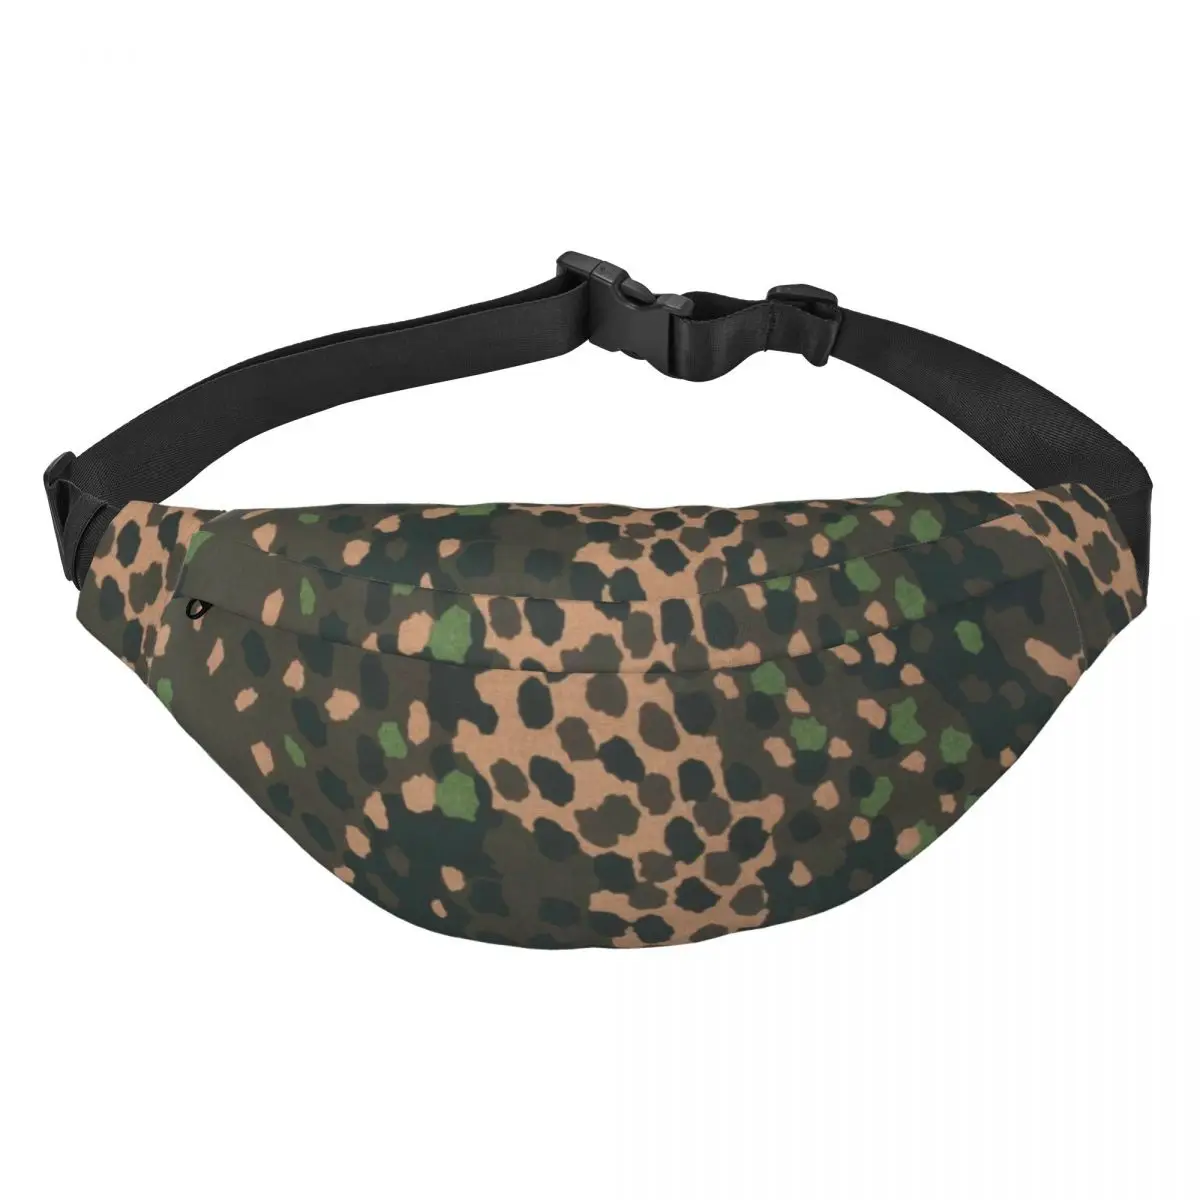 

Erbsenmuster Pea Dot German Camo Fanny Bag Military Army Camouflage Sling Crossbody Waist Pack Cycling Camping Phone Money Pouch